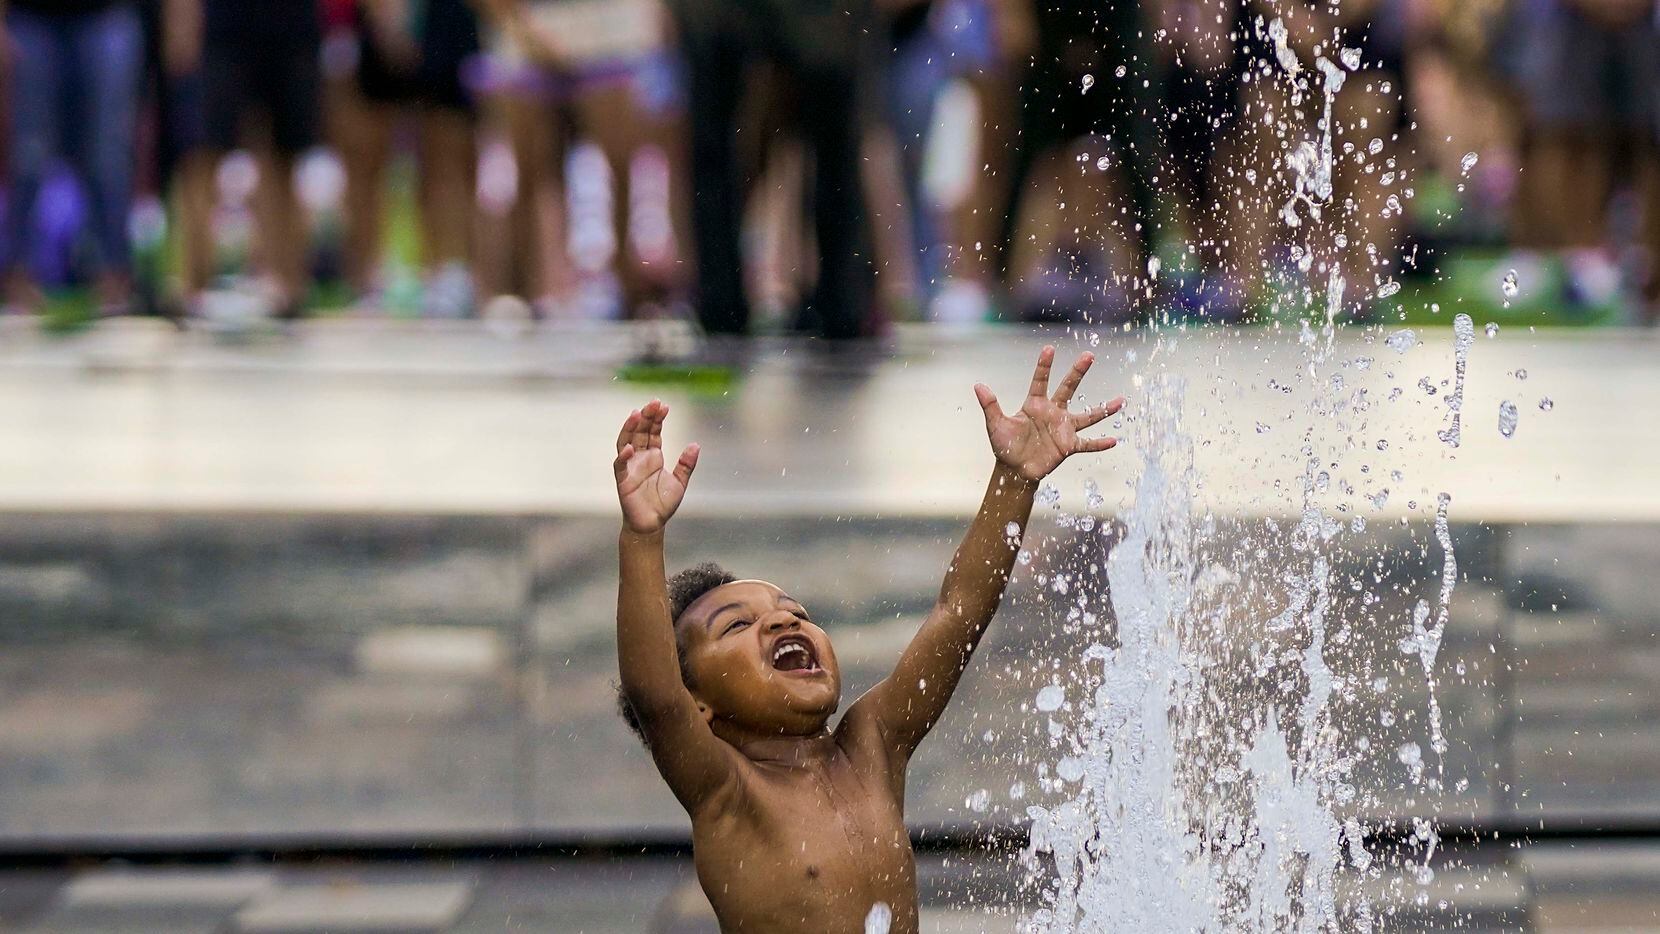 Massiah Webb, 4, plays in a fountain as Dallas ISD trustee Maxie Johnson addresses a rally for Juneteenth in the background at Klyde Warren Park in 2020 in Dallas.